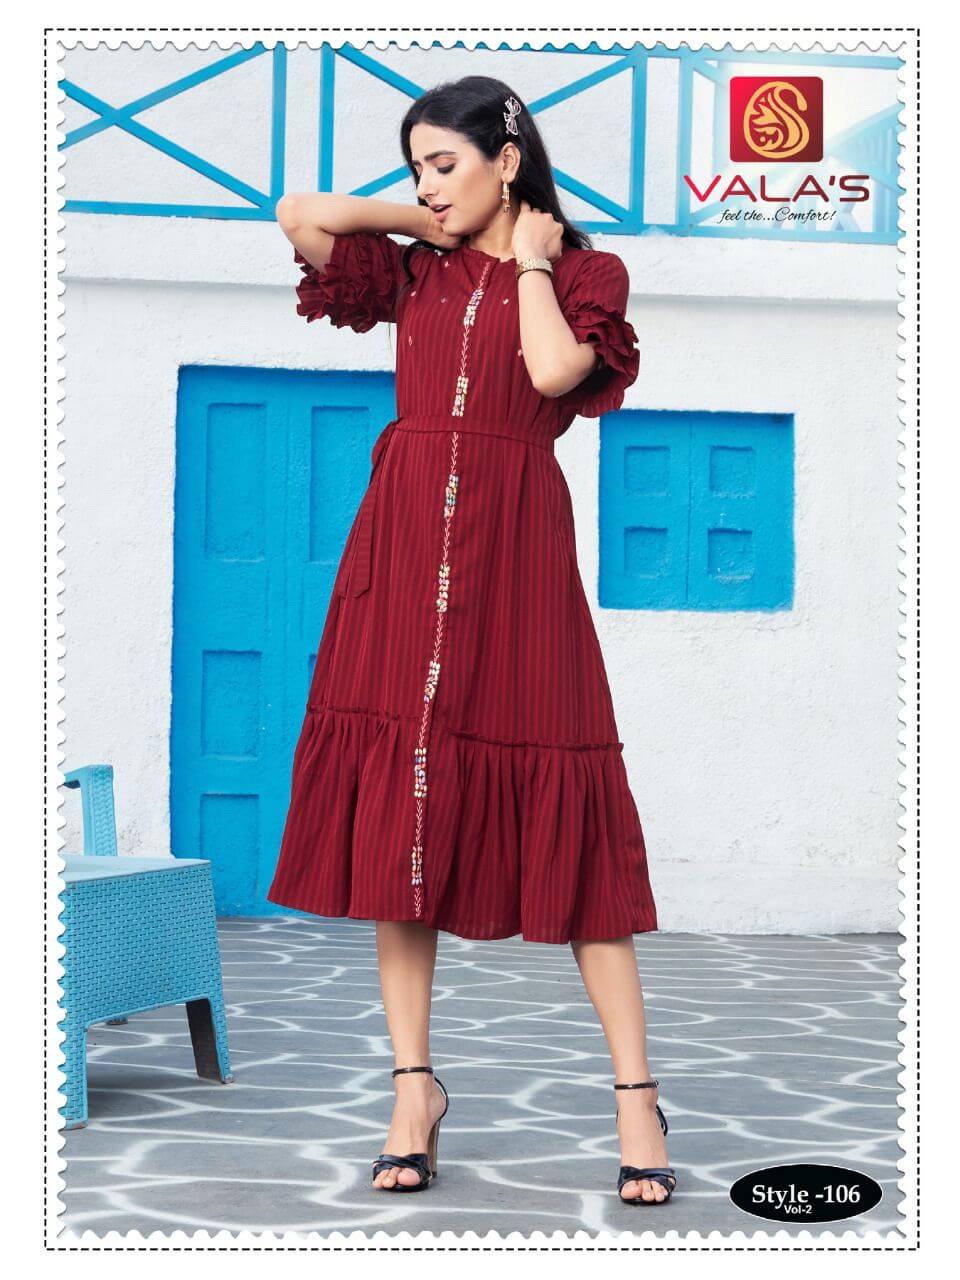 Valas Style Vol 2 collection 4